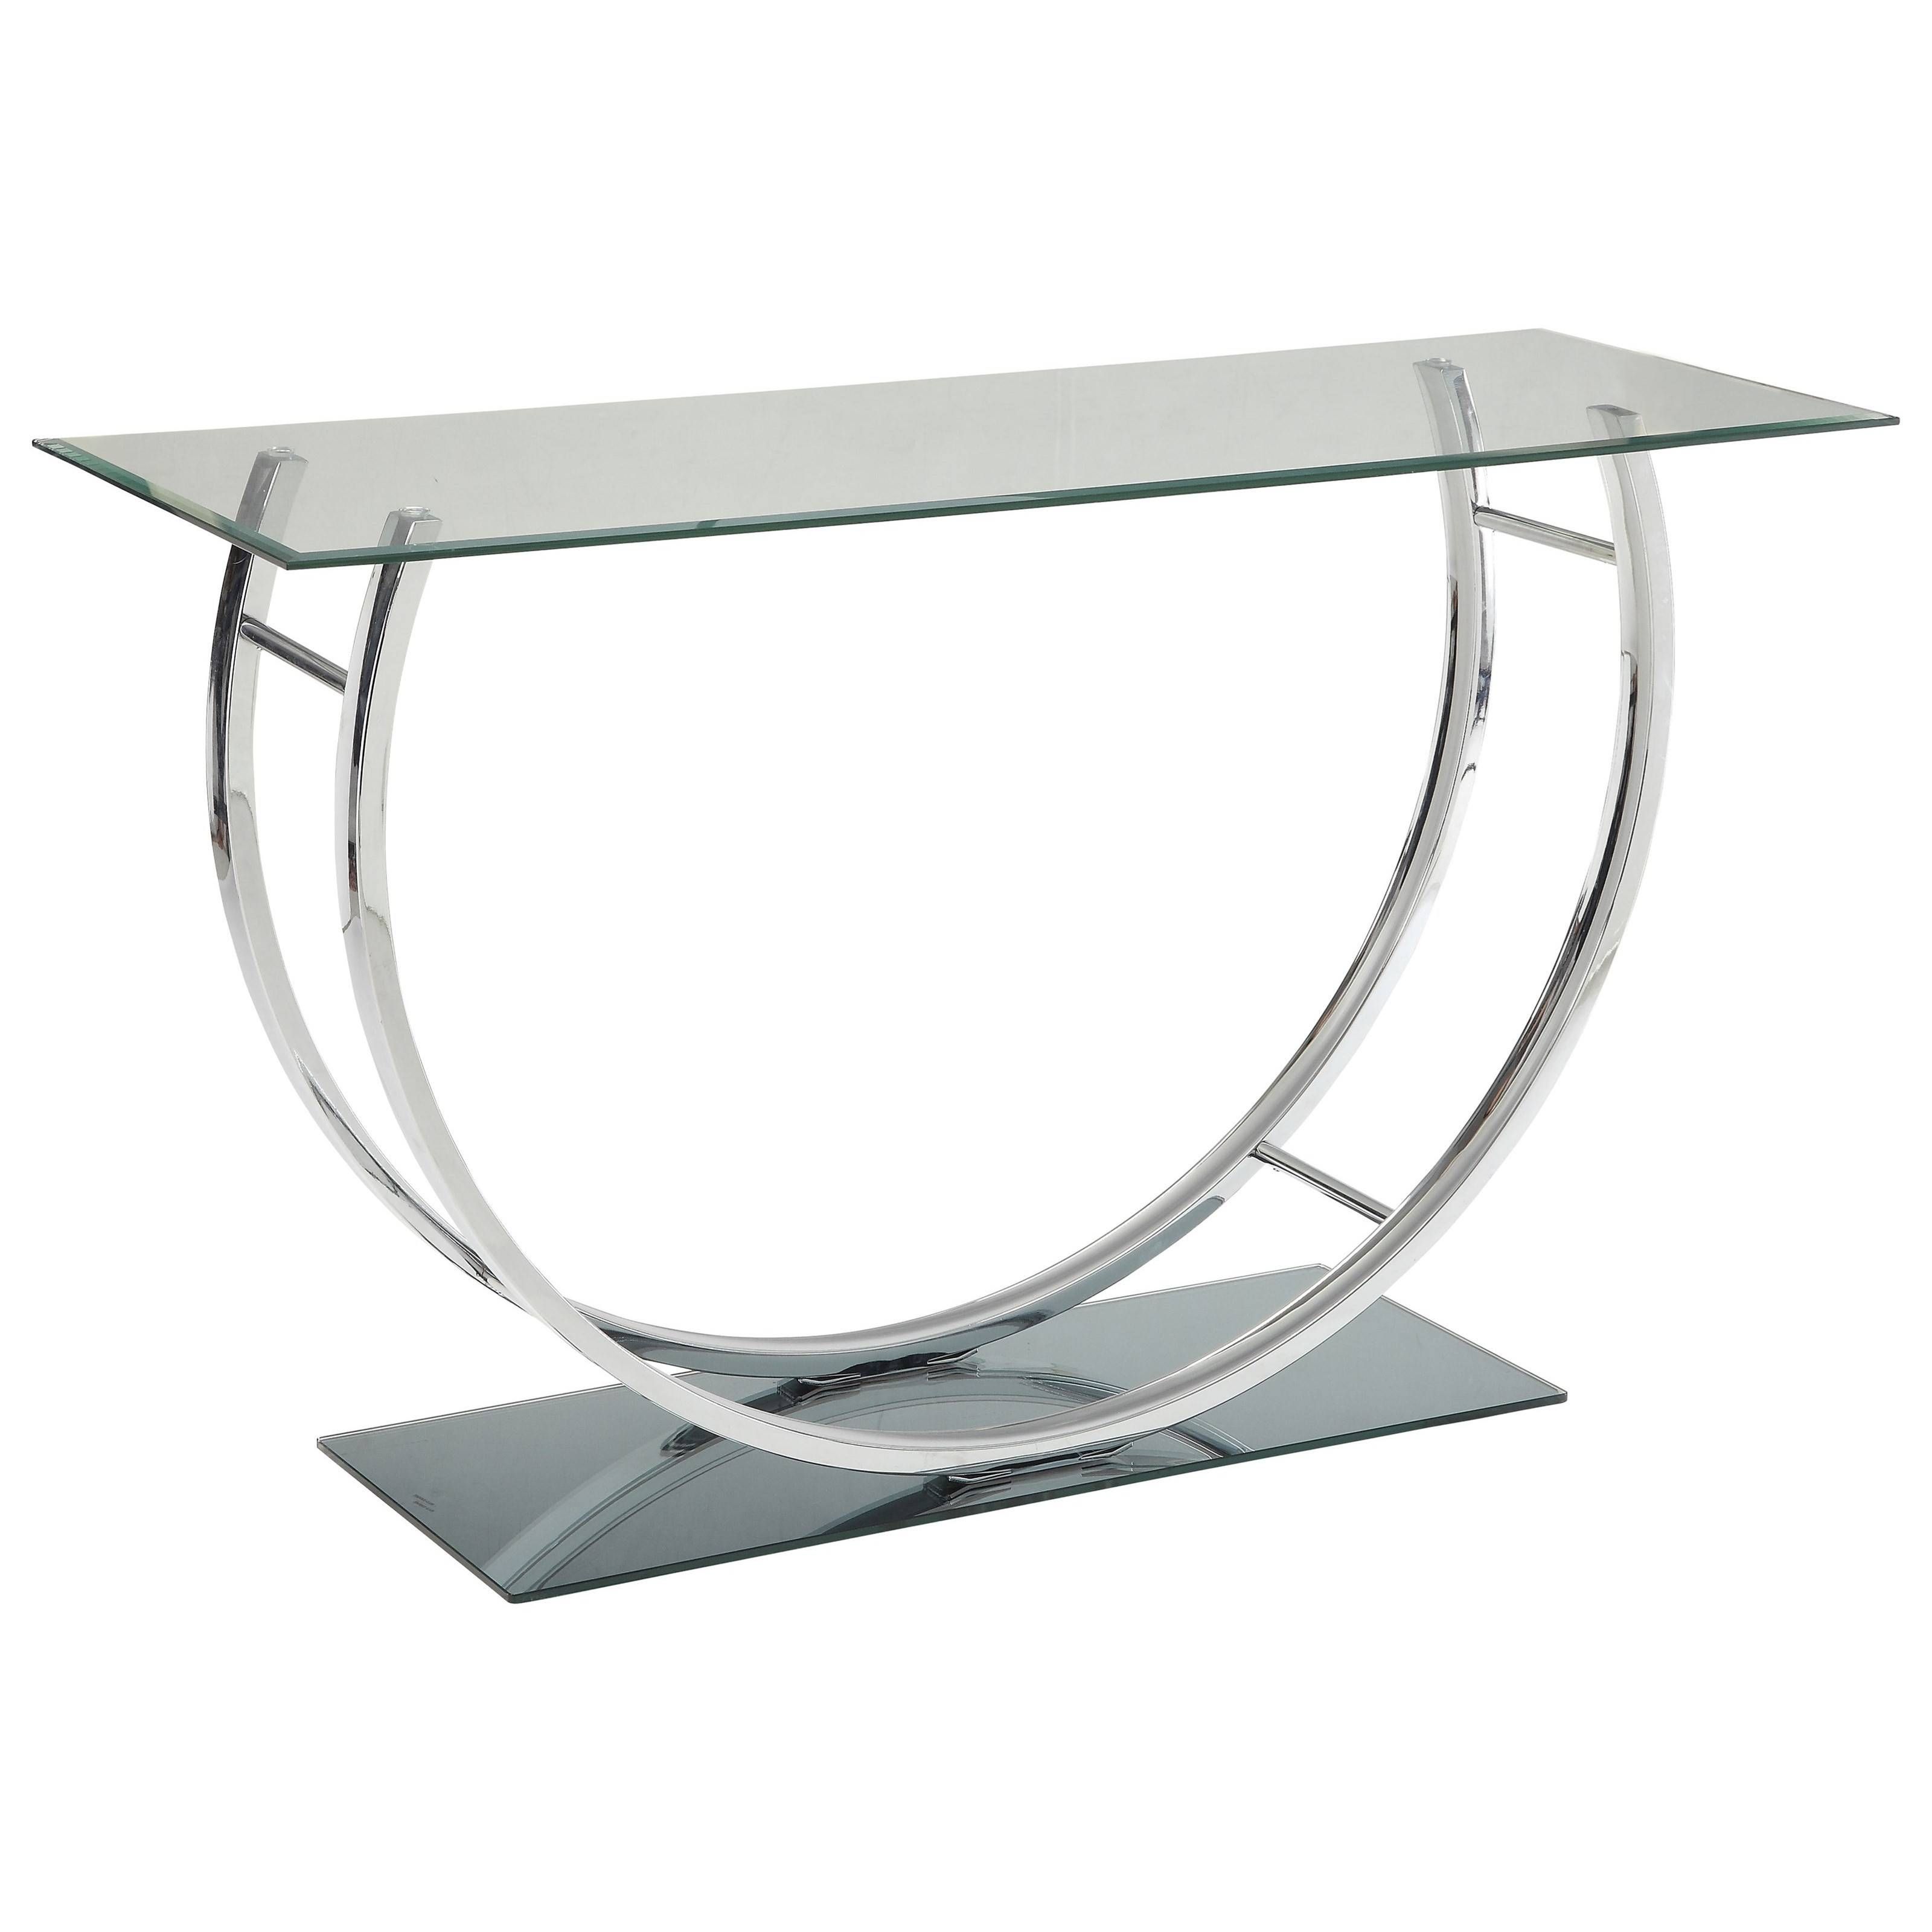 Coaster 704989 Chrome Finish U Shaped Contemporary Sofa Table With Pertaining To Chrome Sofa Tables (View 11 of 15)